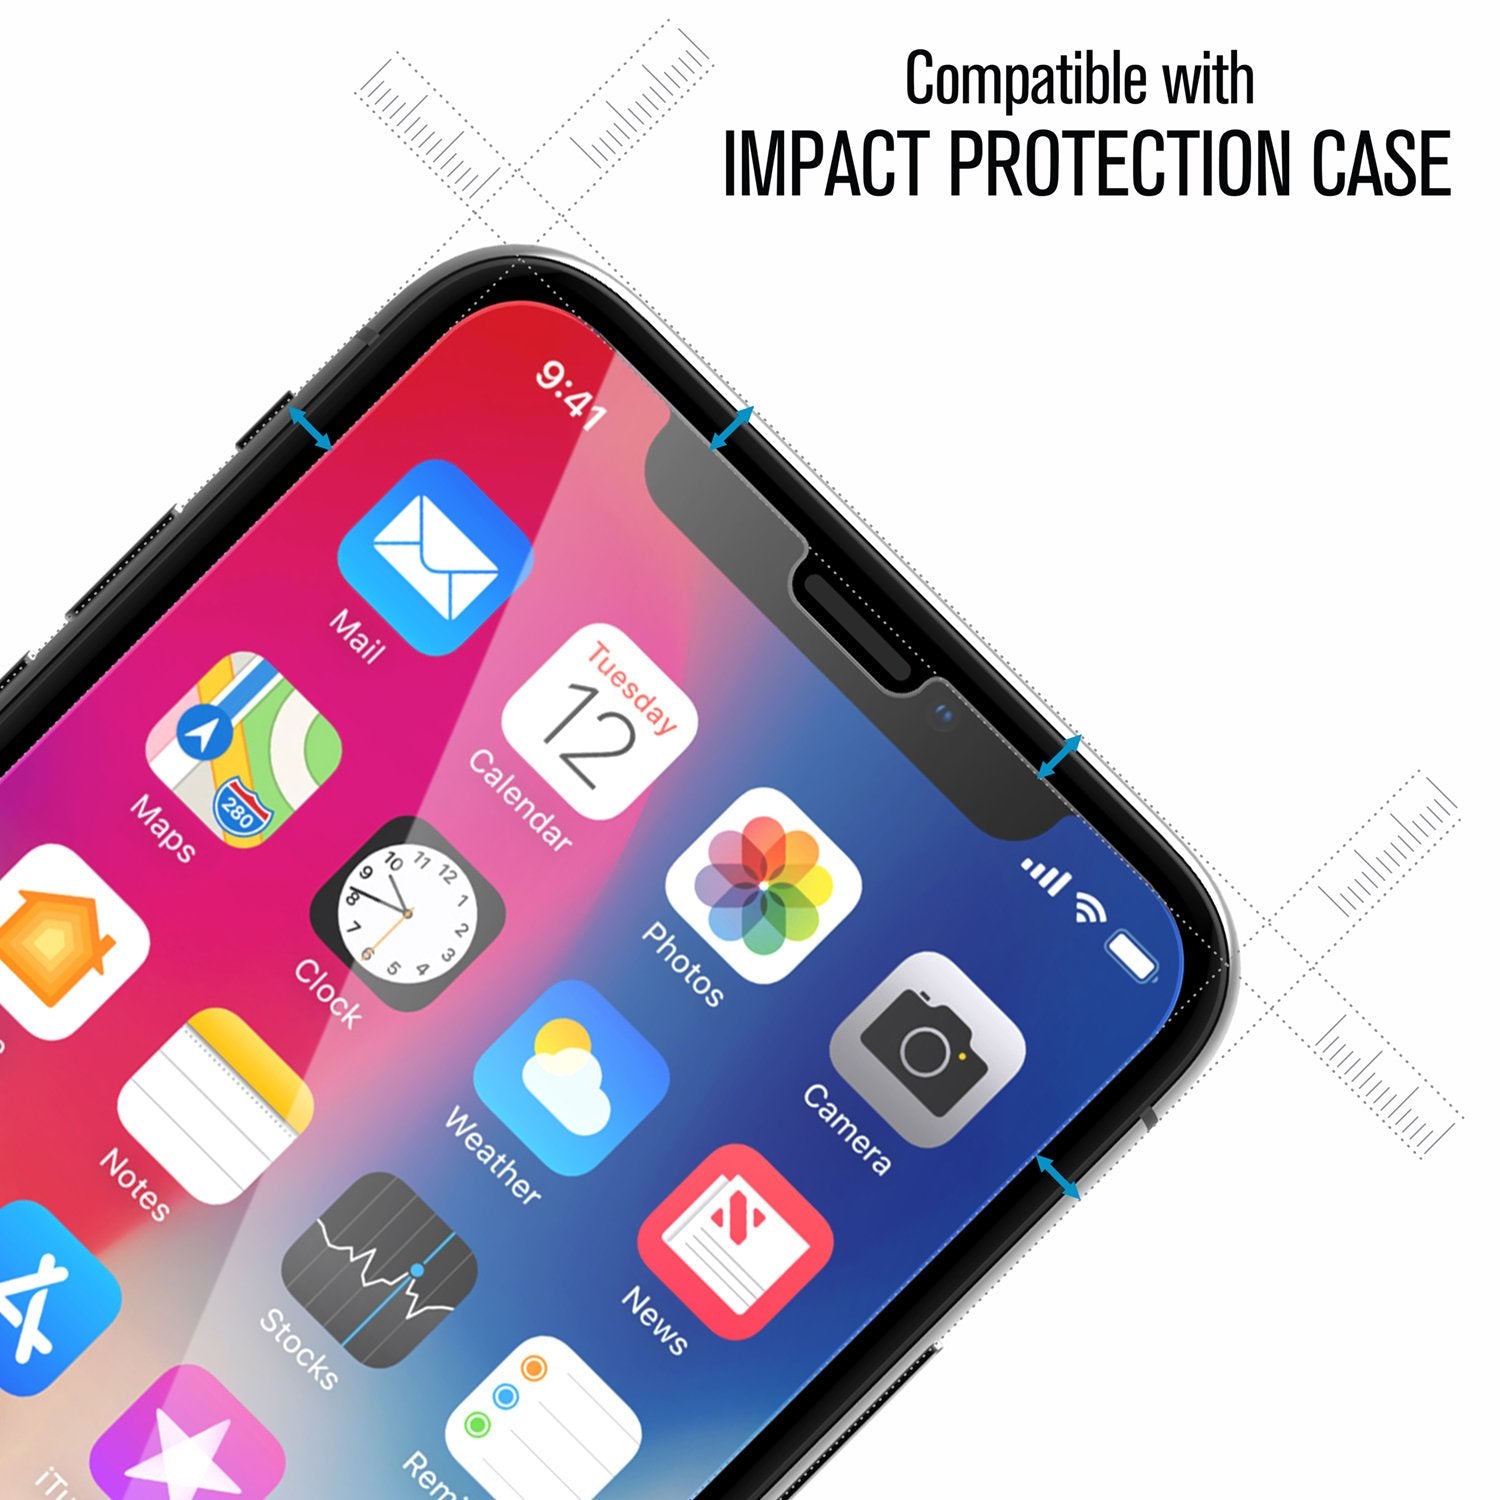 CATGLASIPHOXL | Tempered Glass Screen Protector for iPhone Xs Max & 11 Pro Max